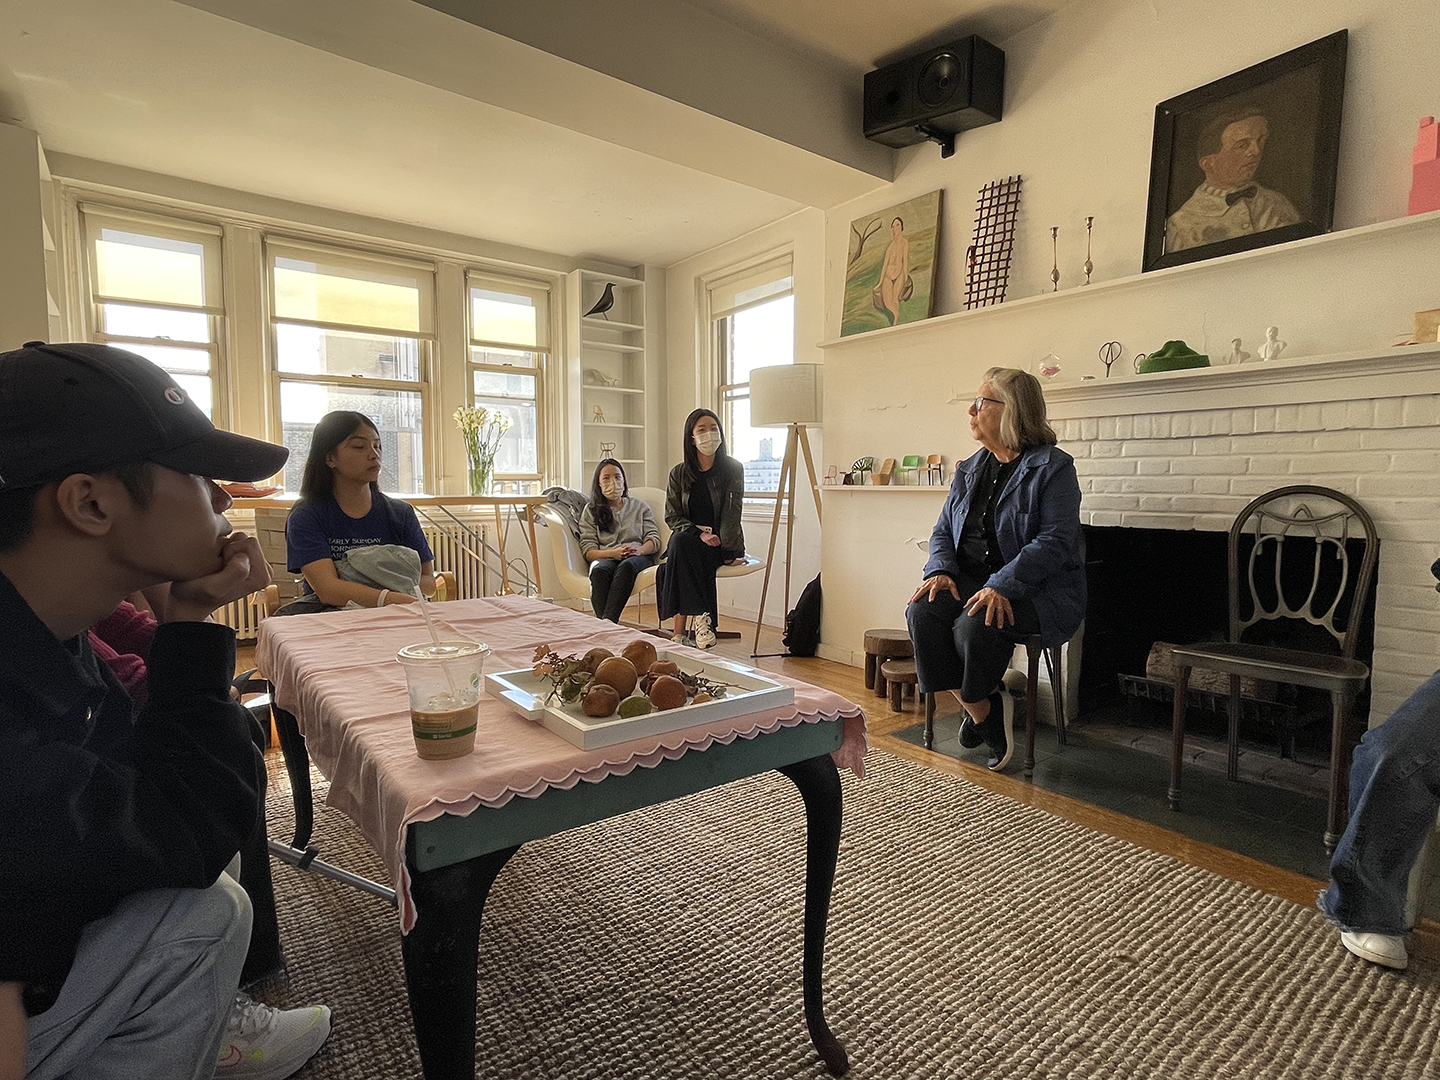 Students in discussion with Maira Kalman at her studio